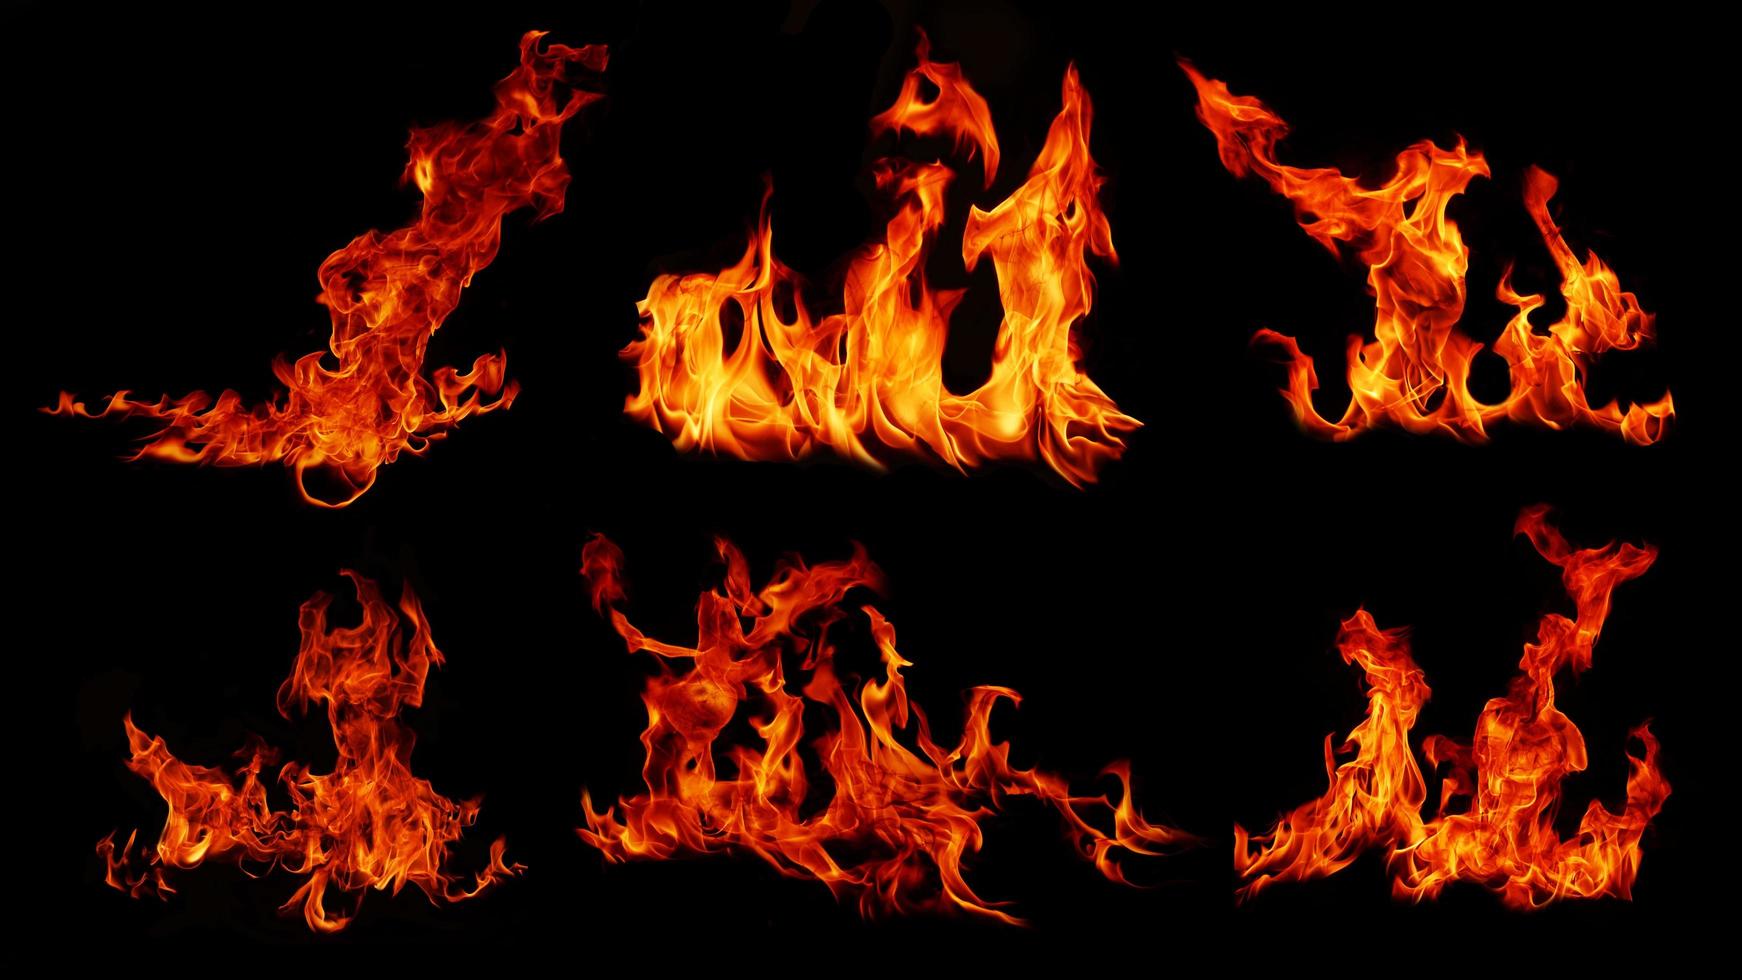 A collection of 6 flame images.Flame Flame Texture for whimsical fire backgrounds. Flame meat that has been burned from the stove or from cooking danger feeling abstract. photo